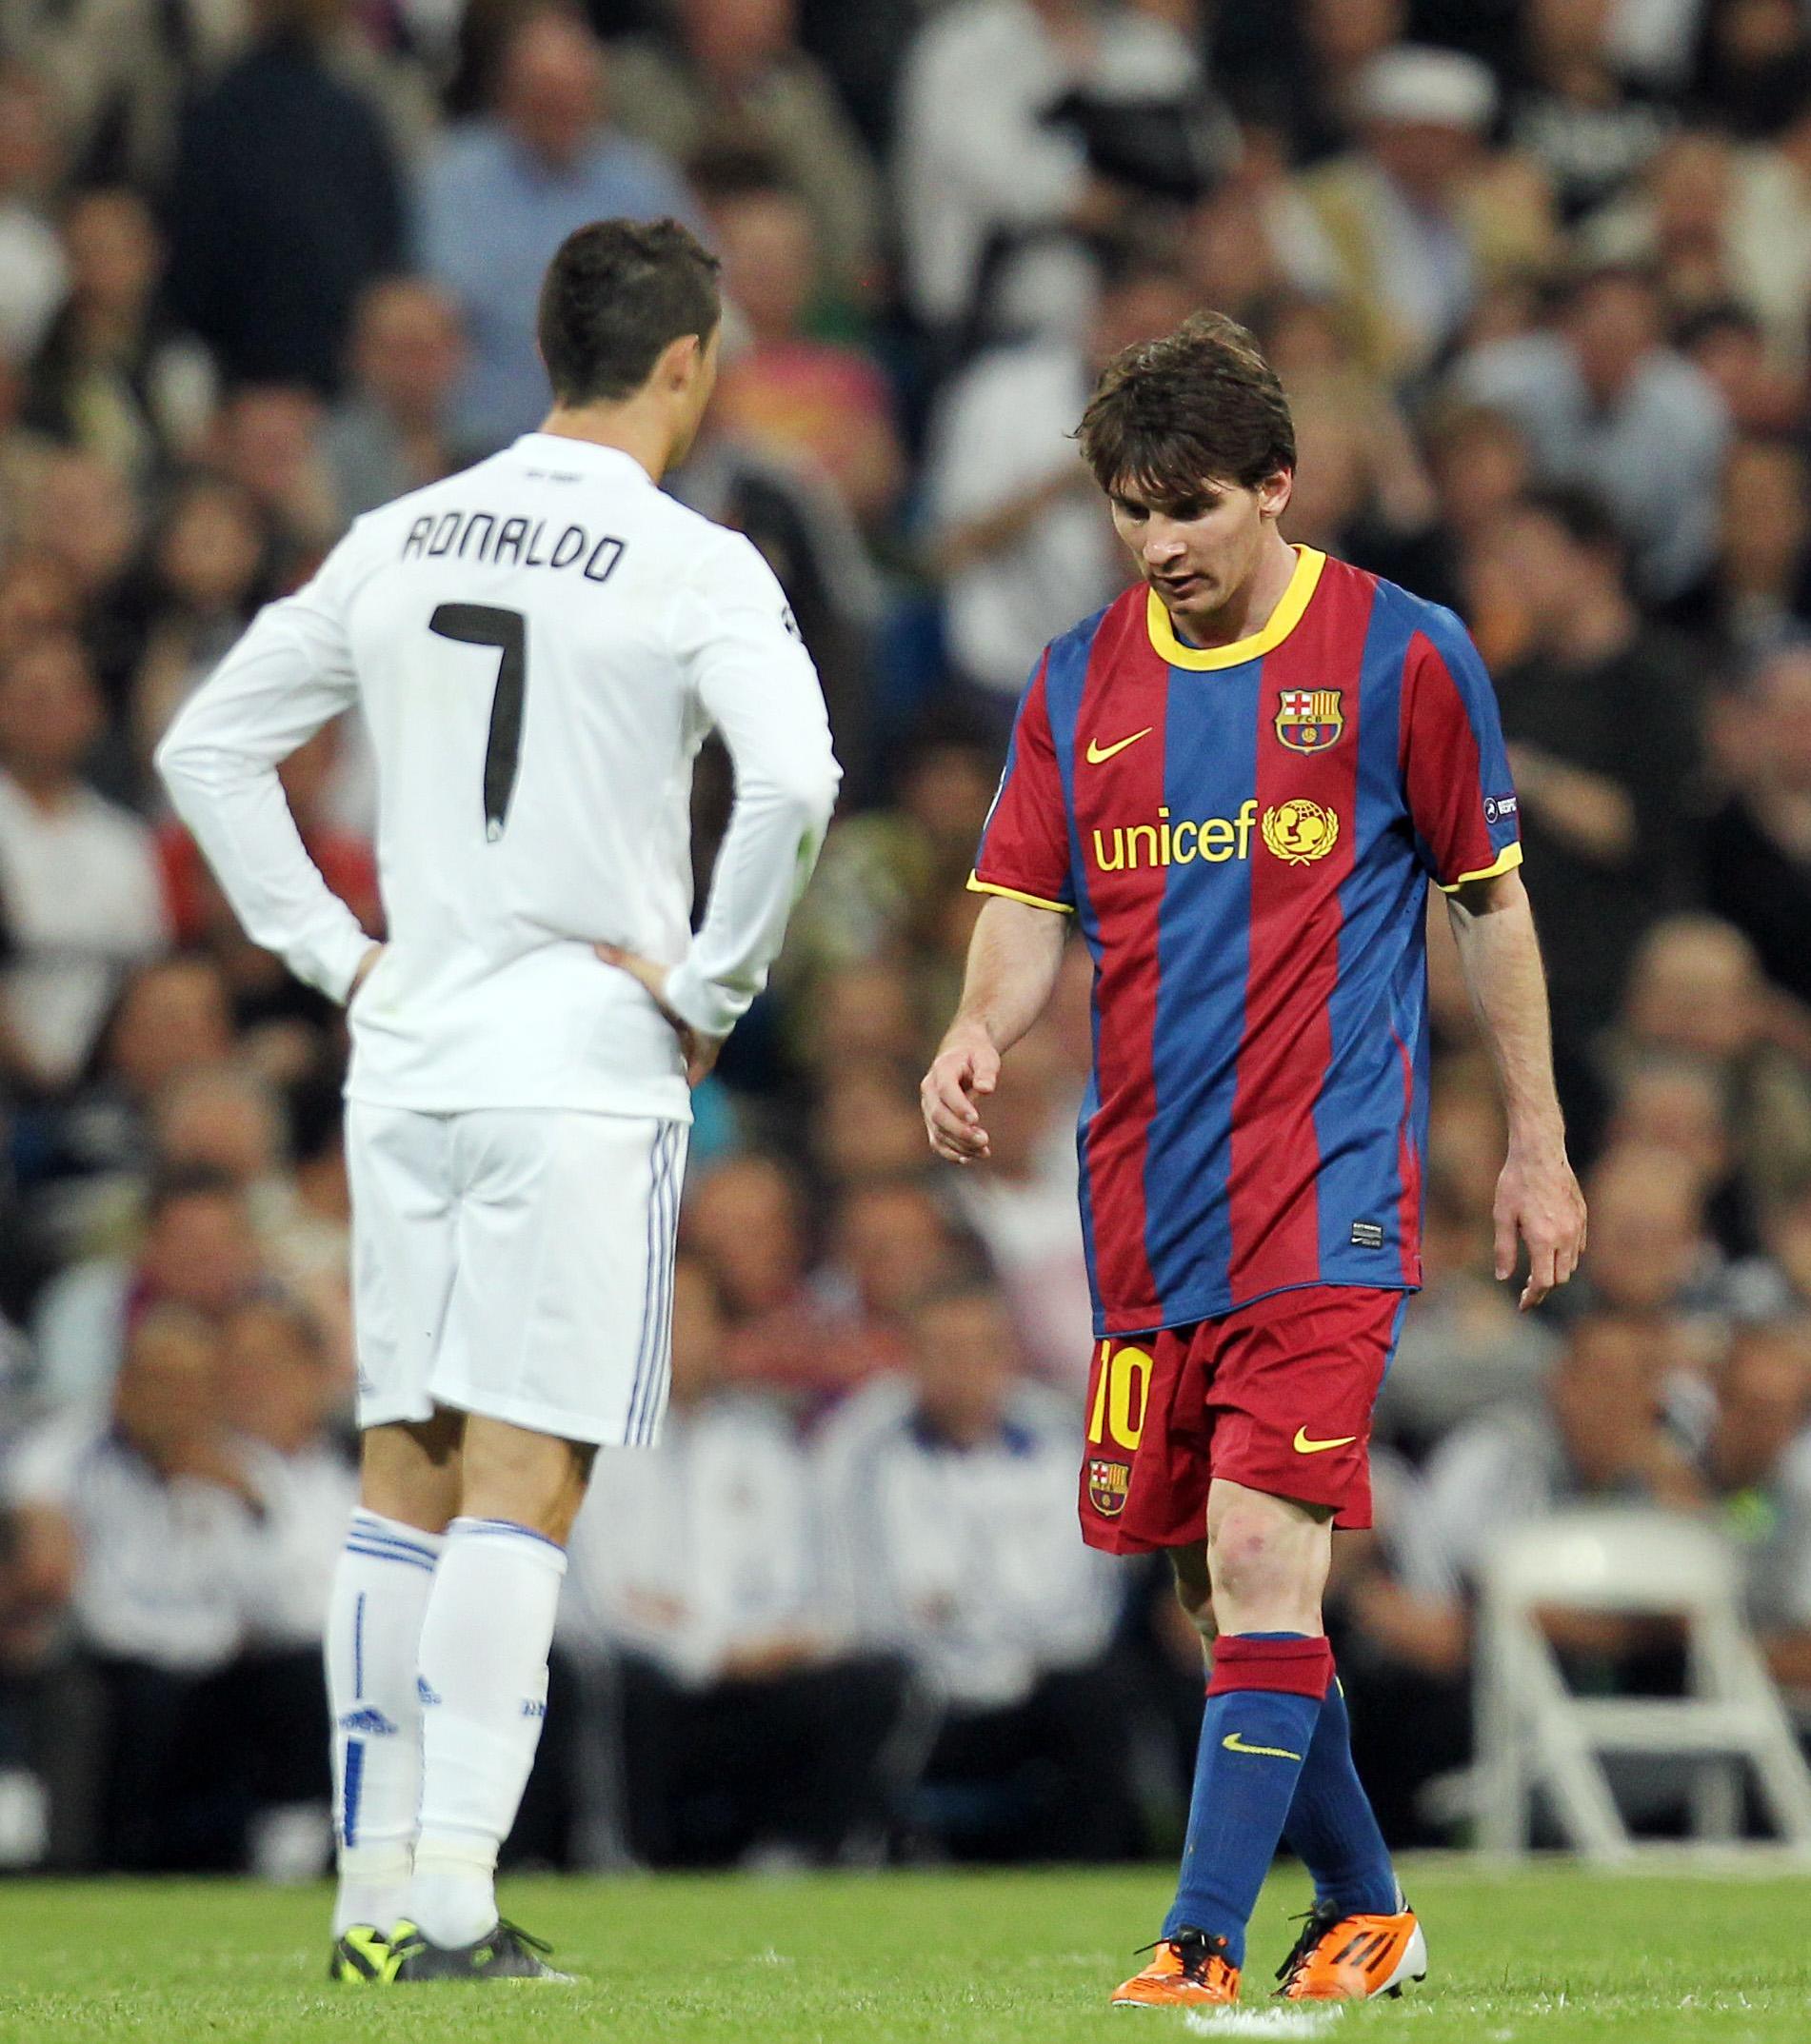 Champions League: Messi and Ronaldo will face each other, PSG to